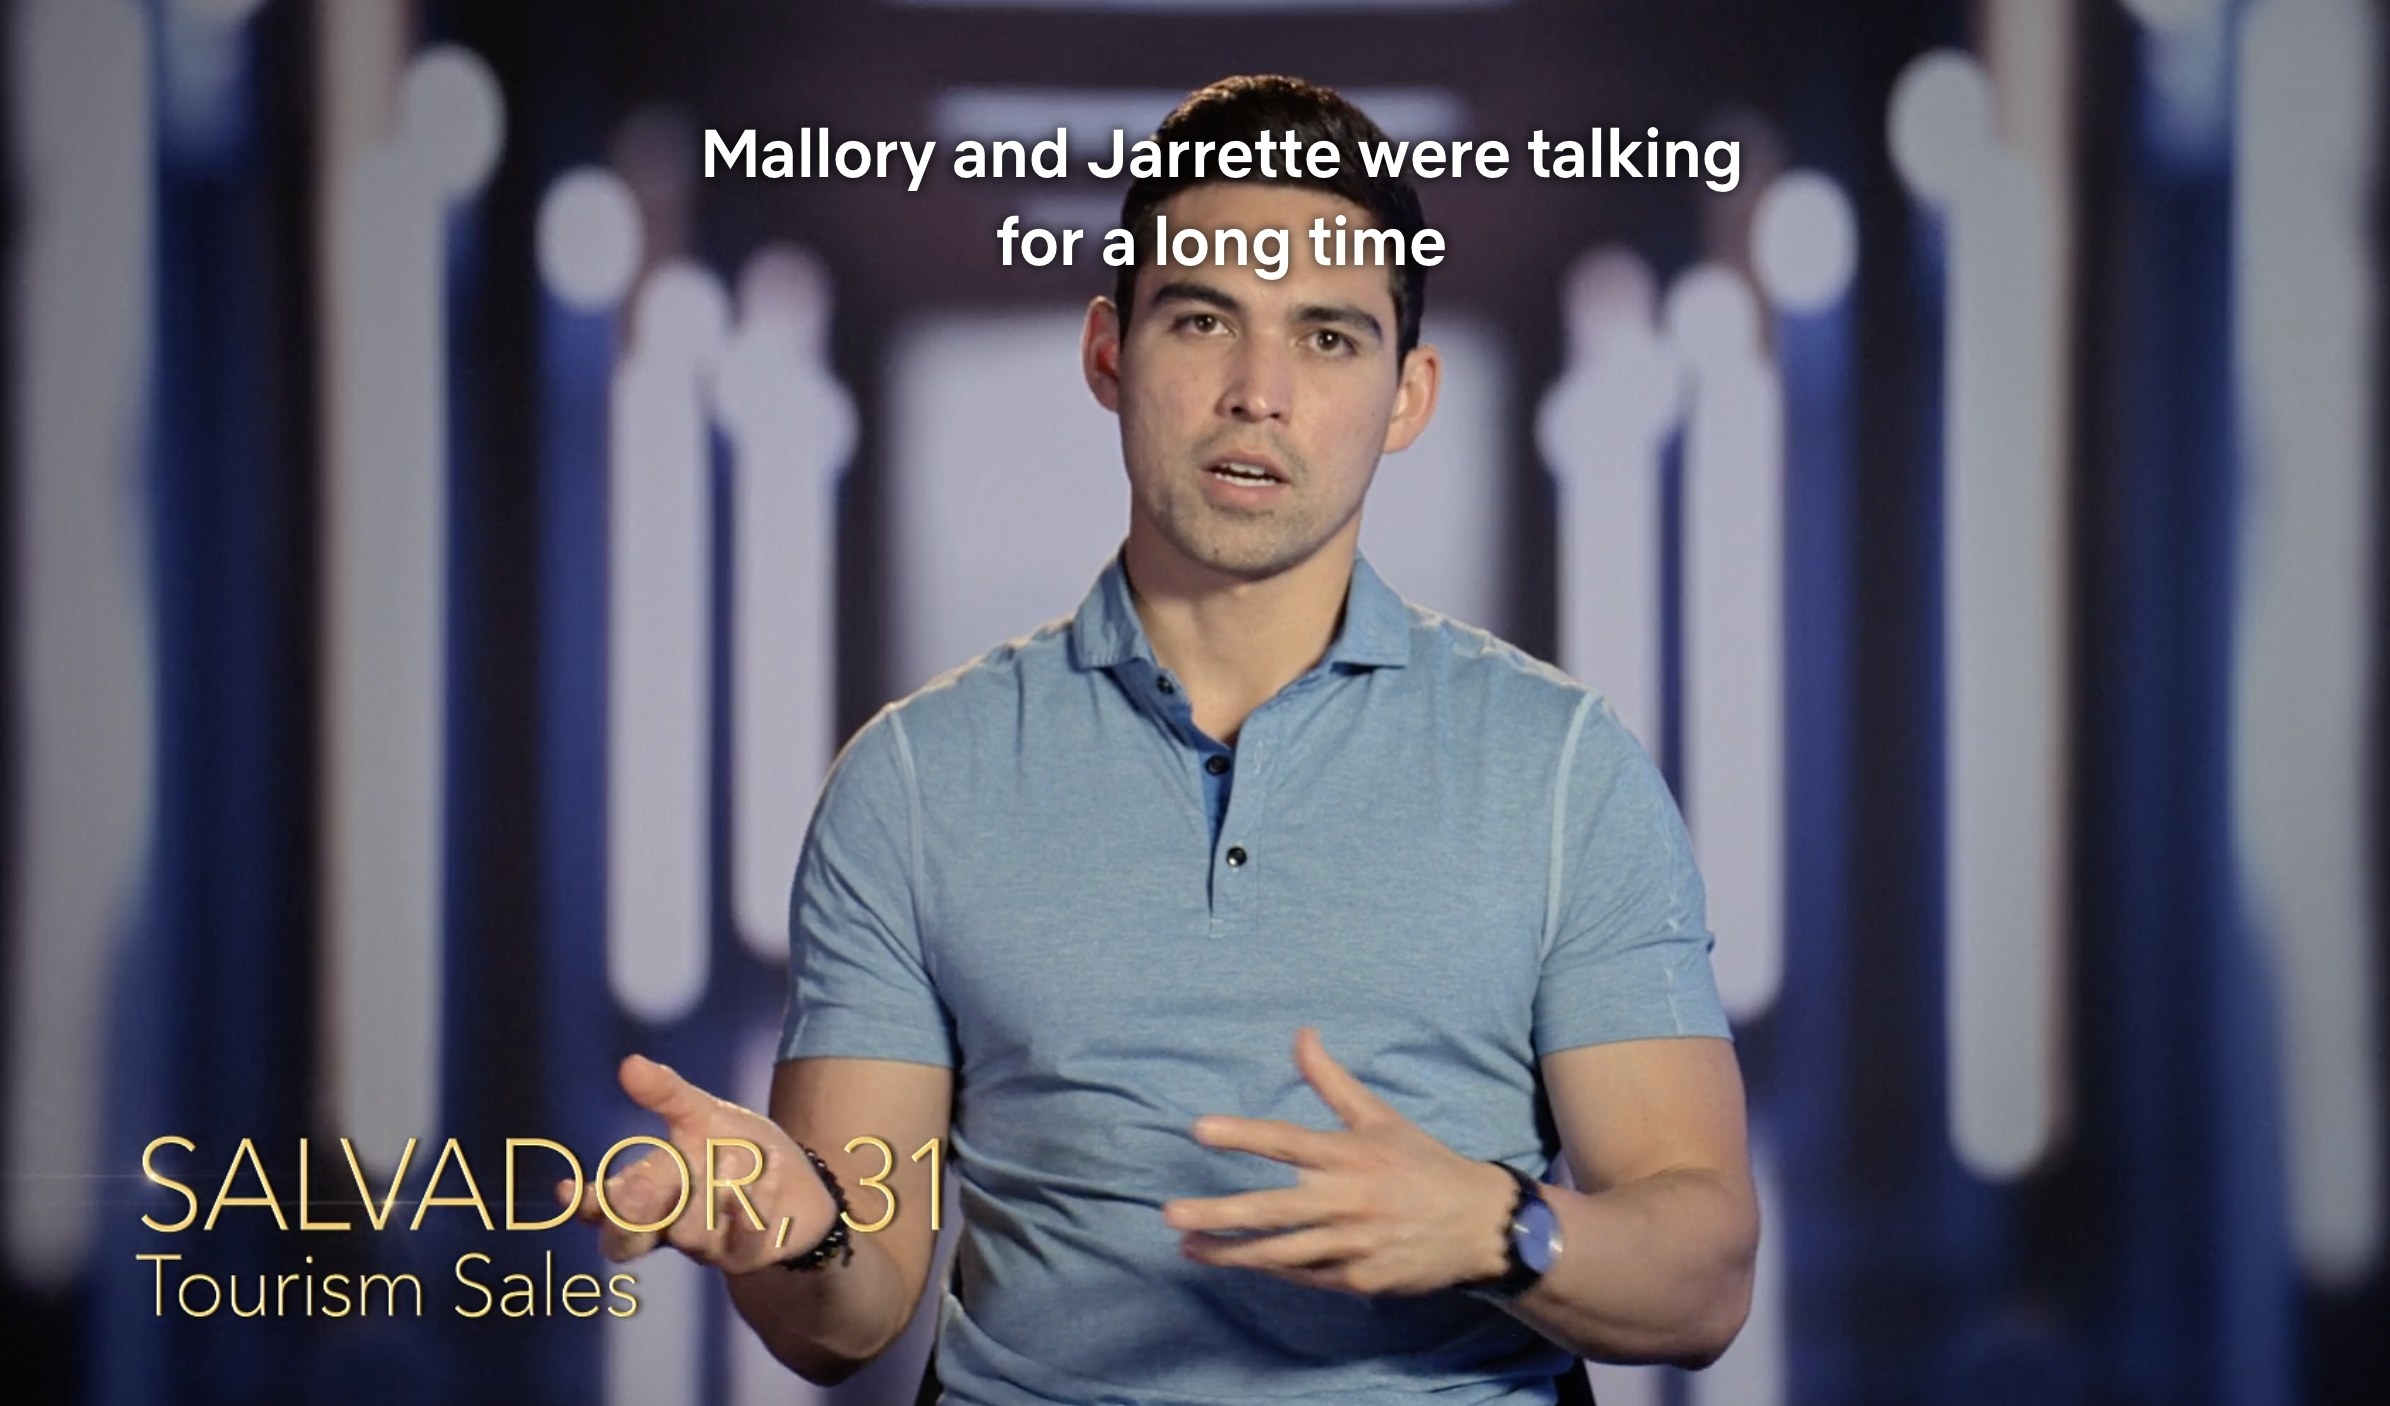 Sal saying &quot;Mallory and Jarrette were talking for a long time&quot;